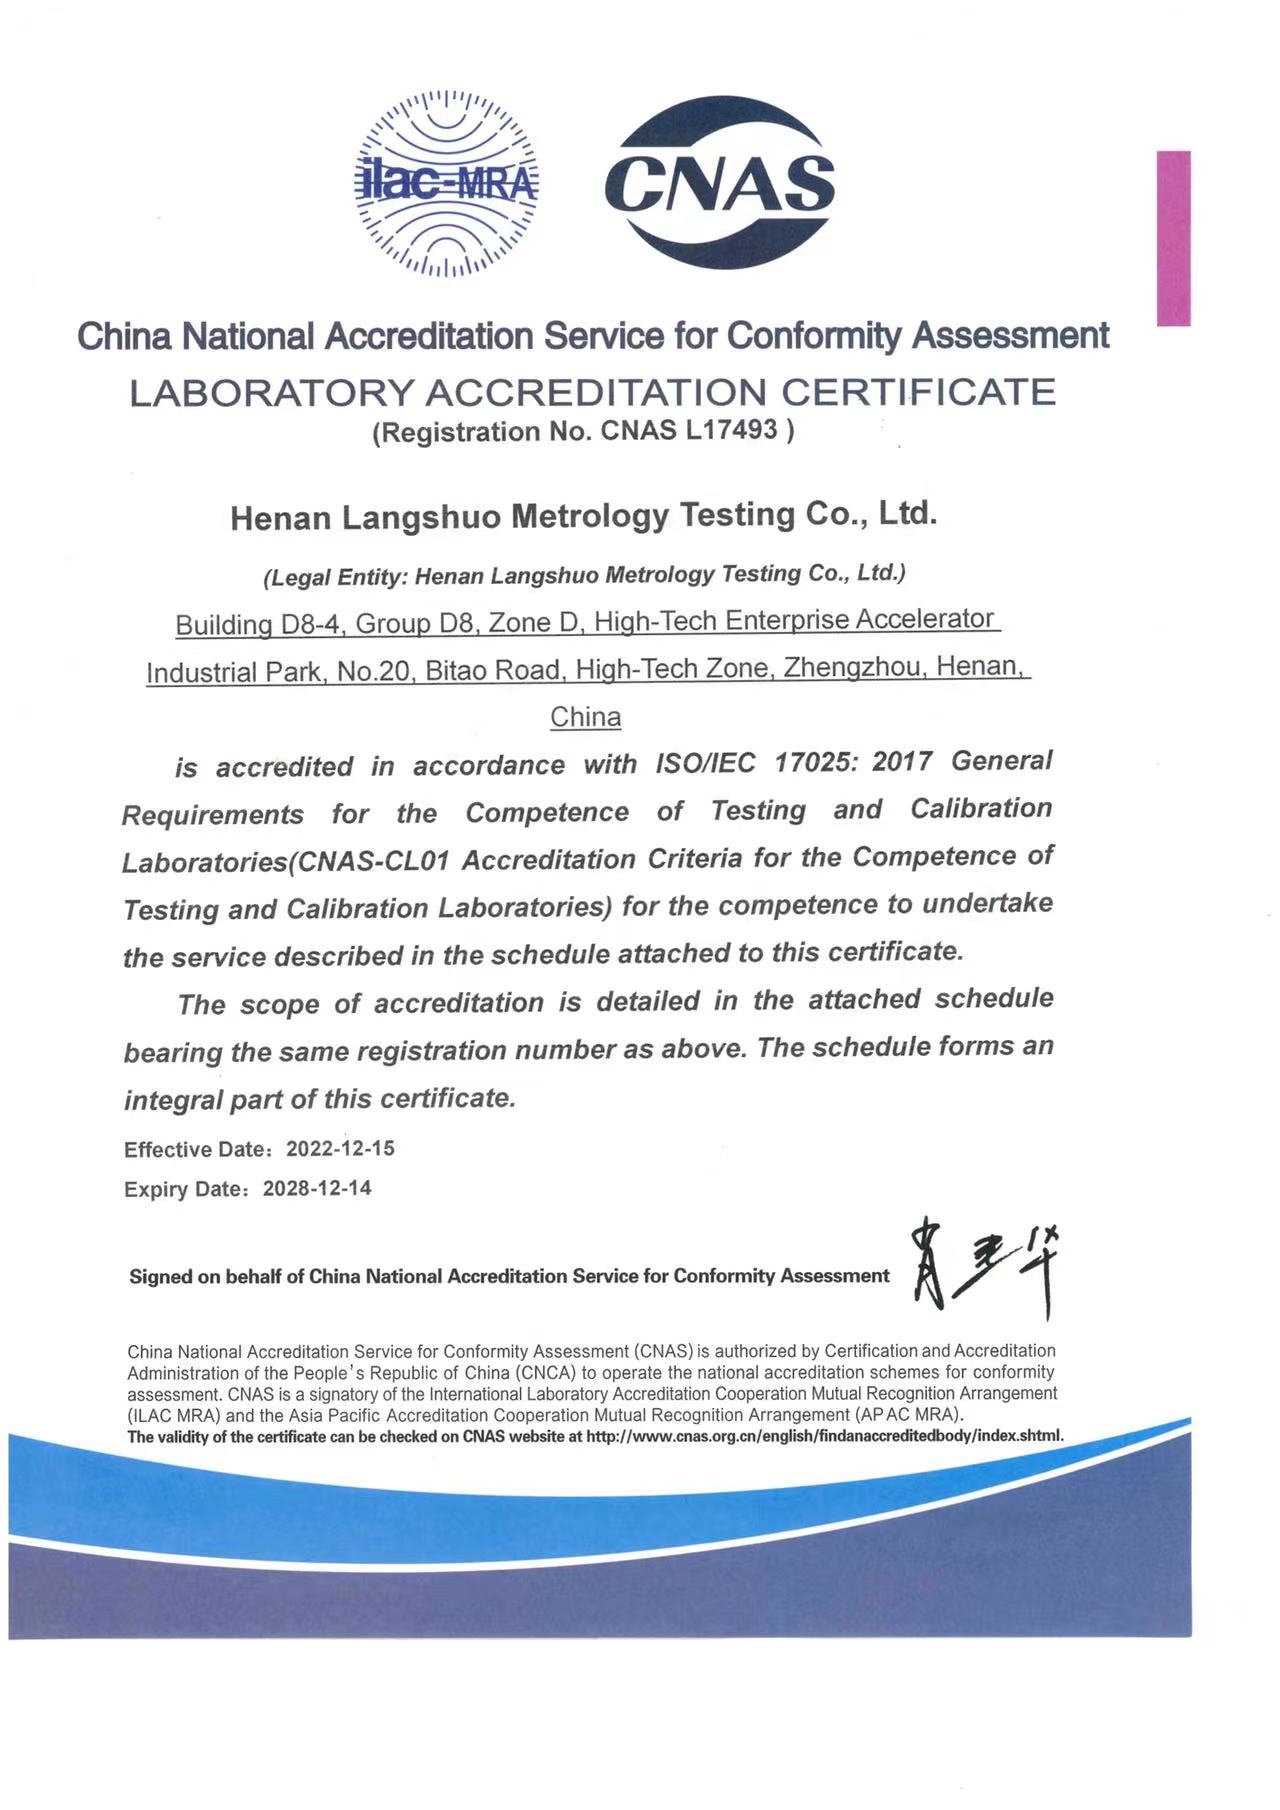 Langshuo measurement: China National Accreditation Committee for Conformity Assessment (CNAS) labora